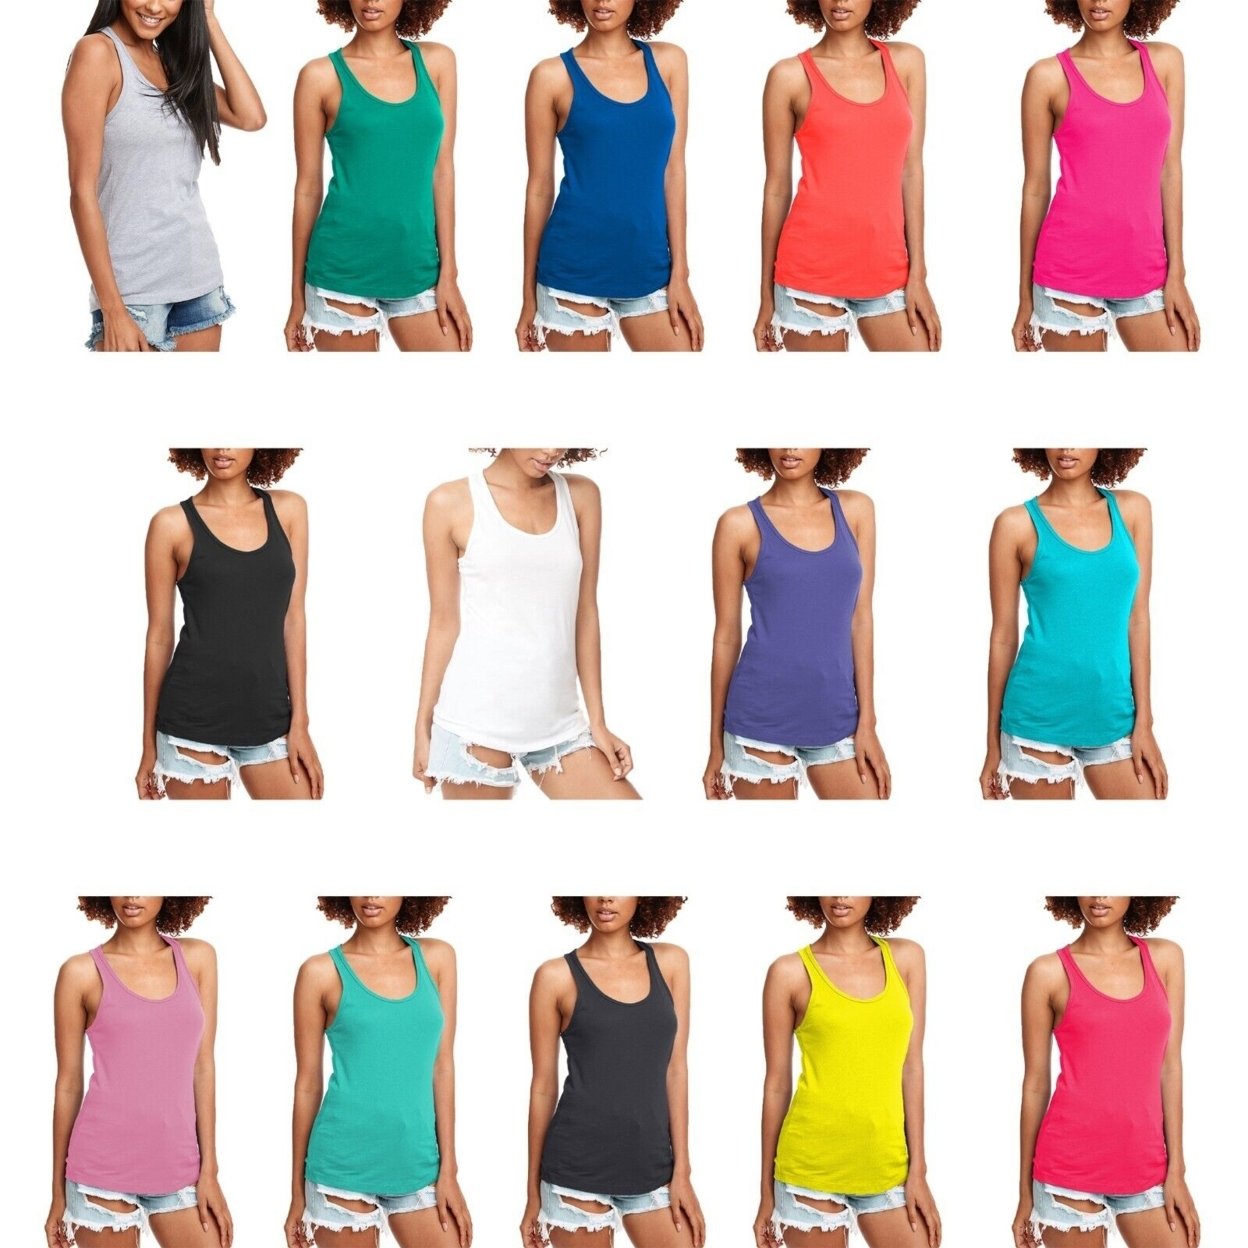 5-Pack-Women's Tank Tops Basic Cotton Smooth Sleeveless Racerback Summer Tanks/camisoles Casual, Lounge, Athletic, Active Wear, Solid Color